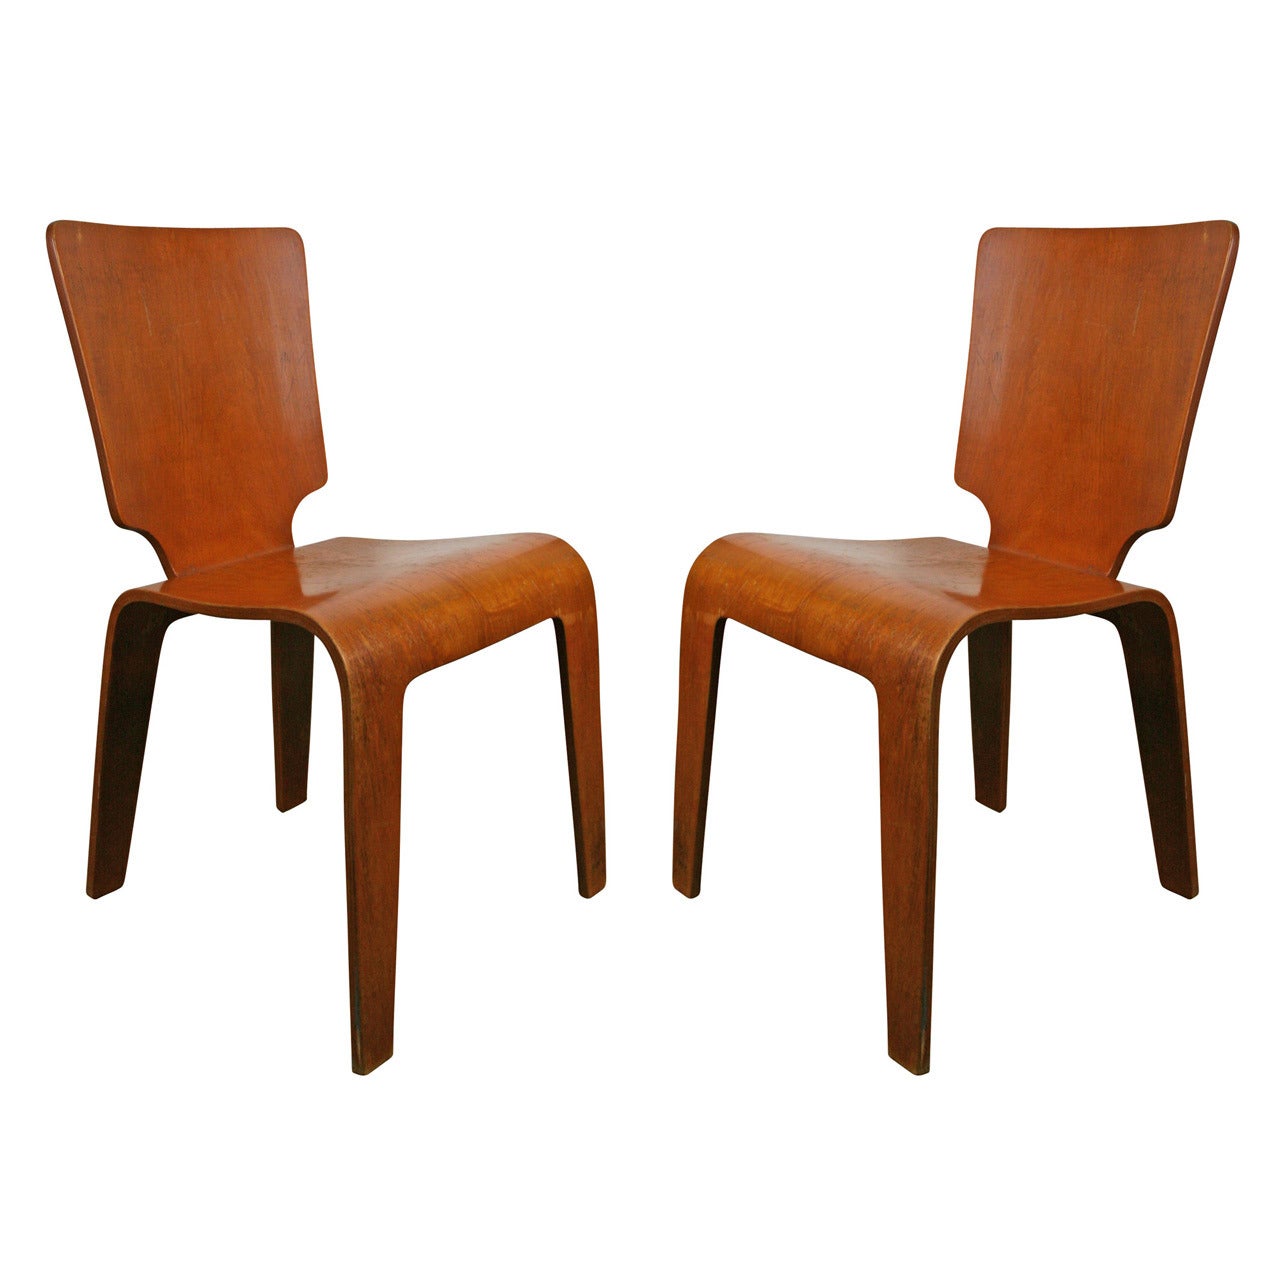 Pair of Thaden-Jordan Molded Plywood Side Chairs, circa 1947